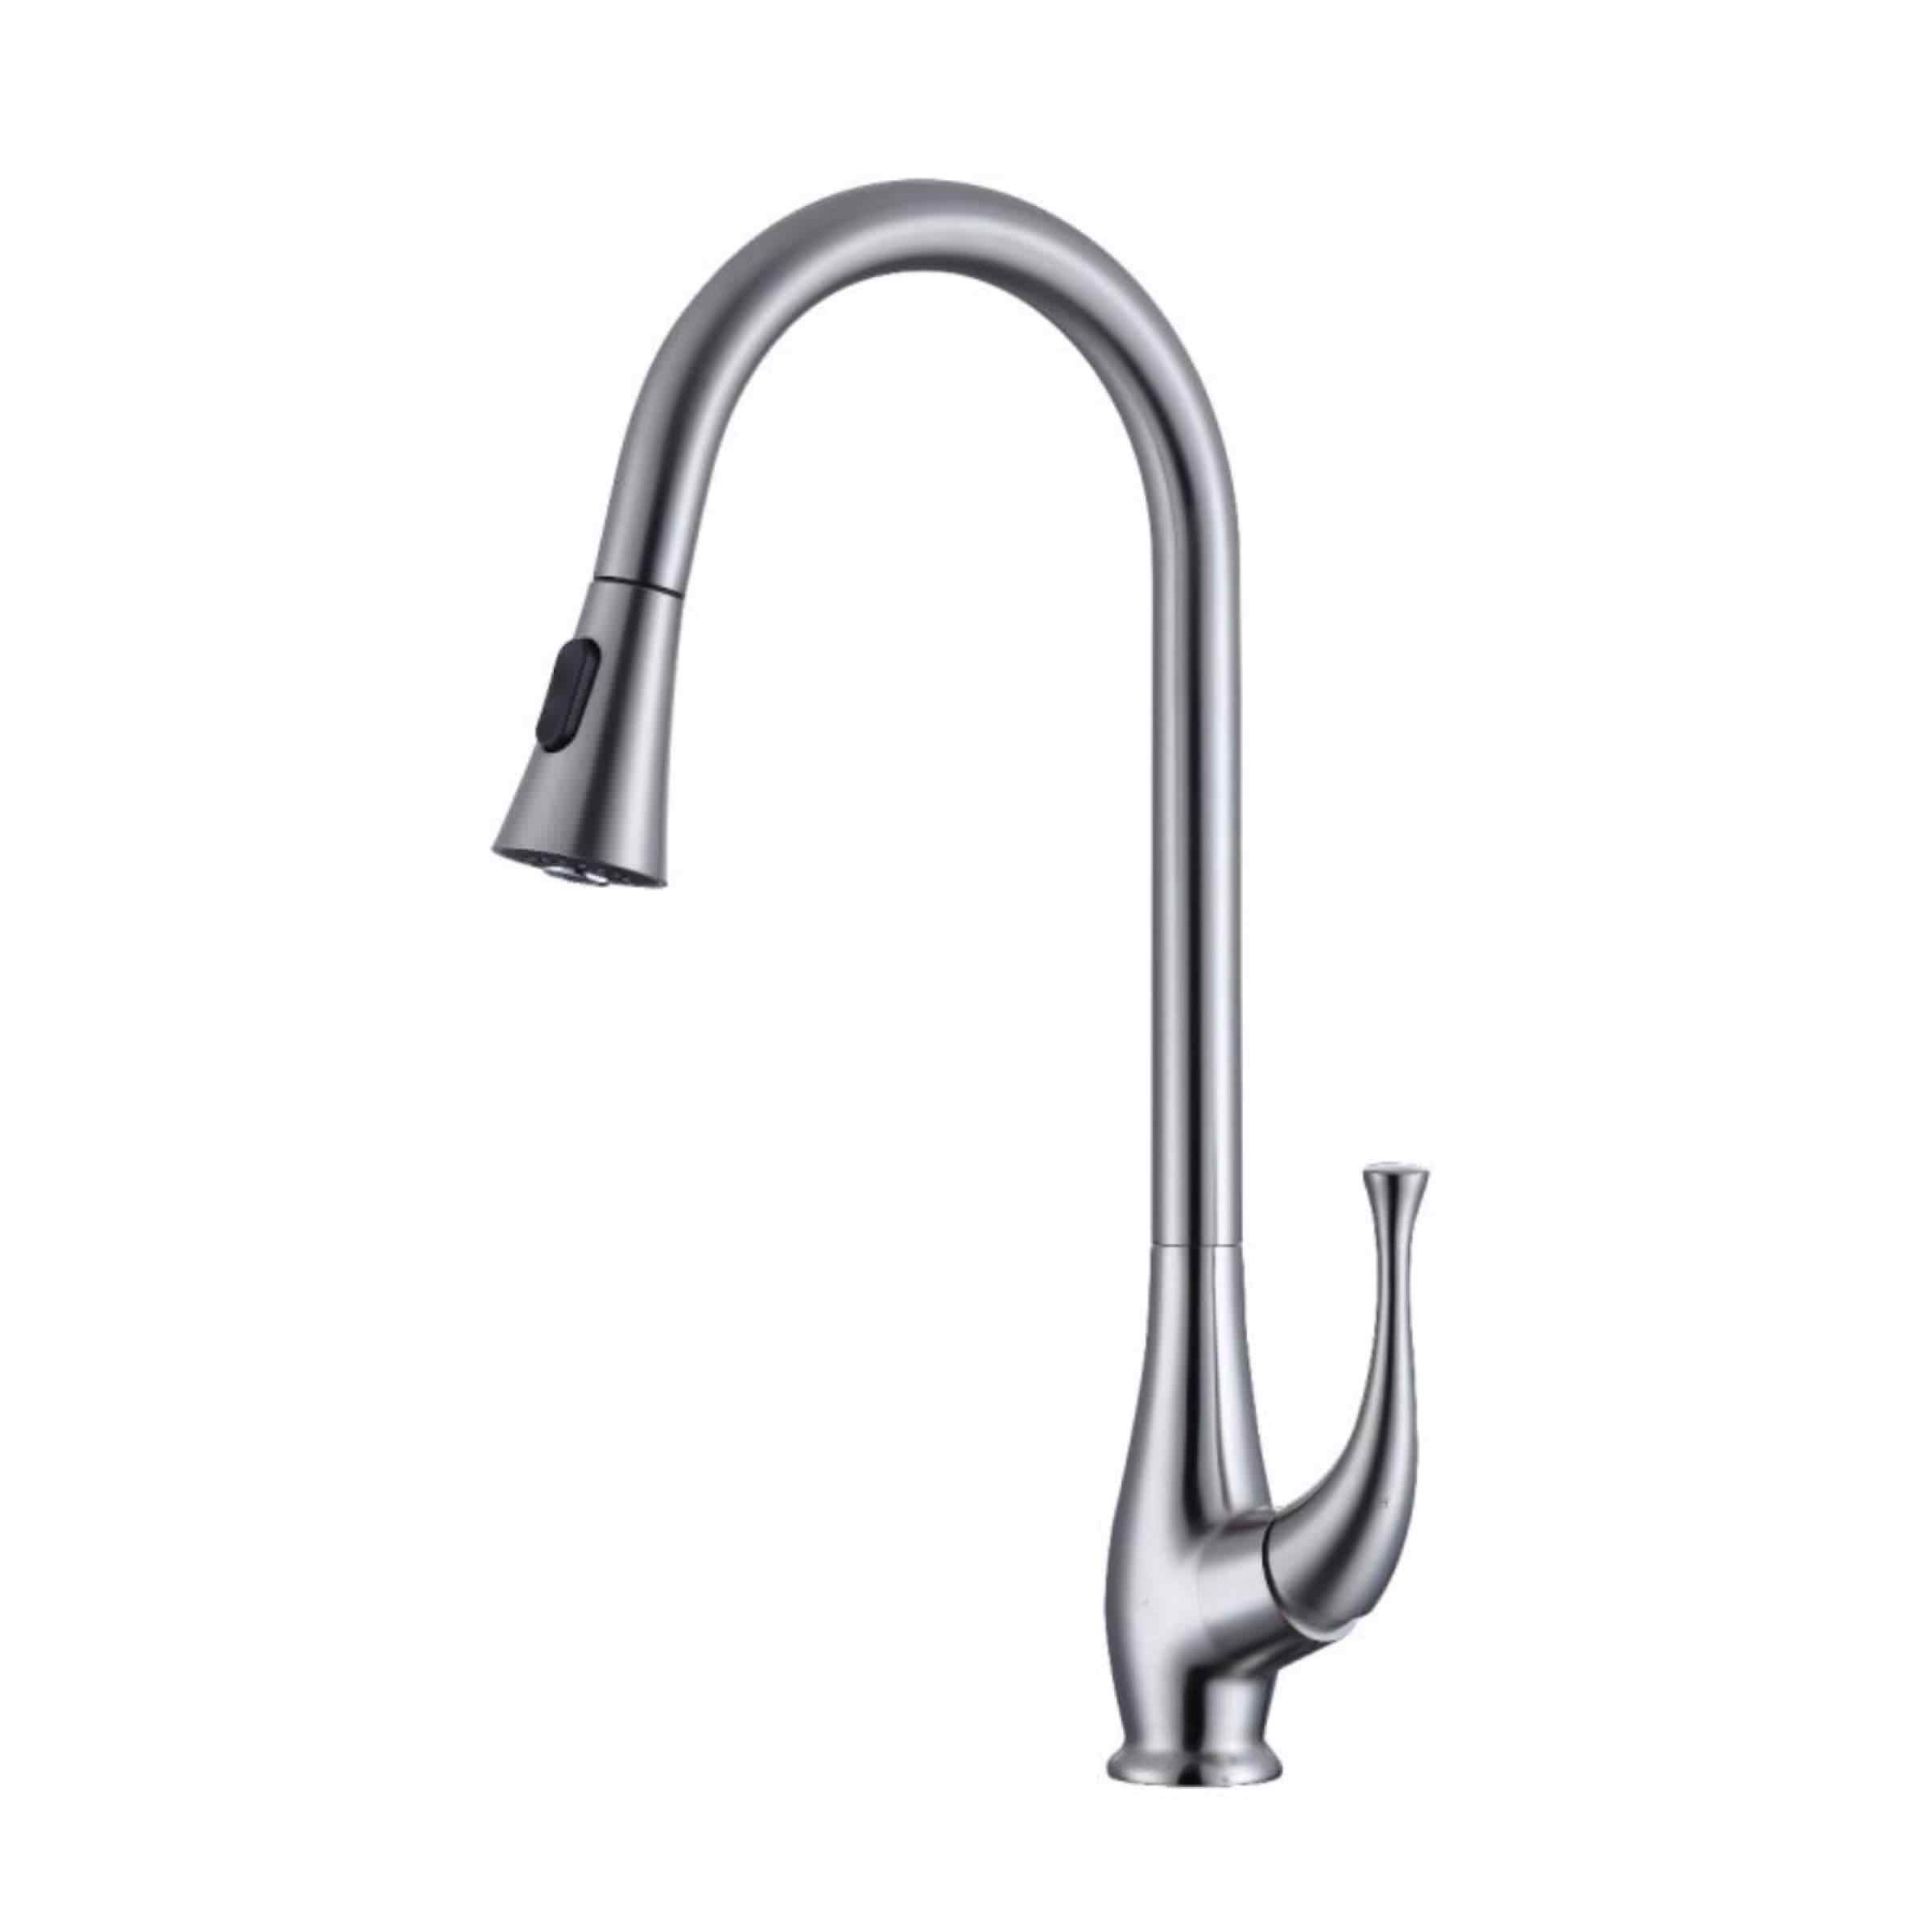 Pull Down Kitchen Faucet 10 13/16" x 19 1/4" In Brushed Nickel. (RA-8100BN)